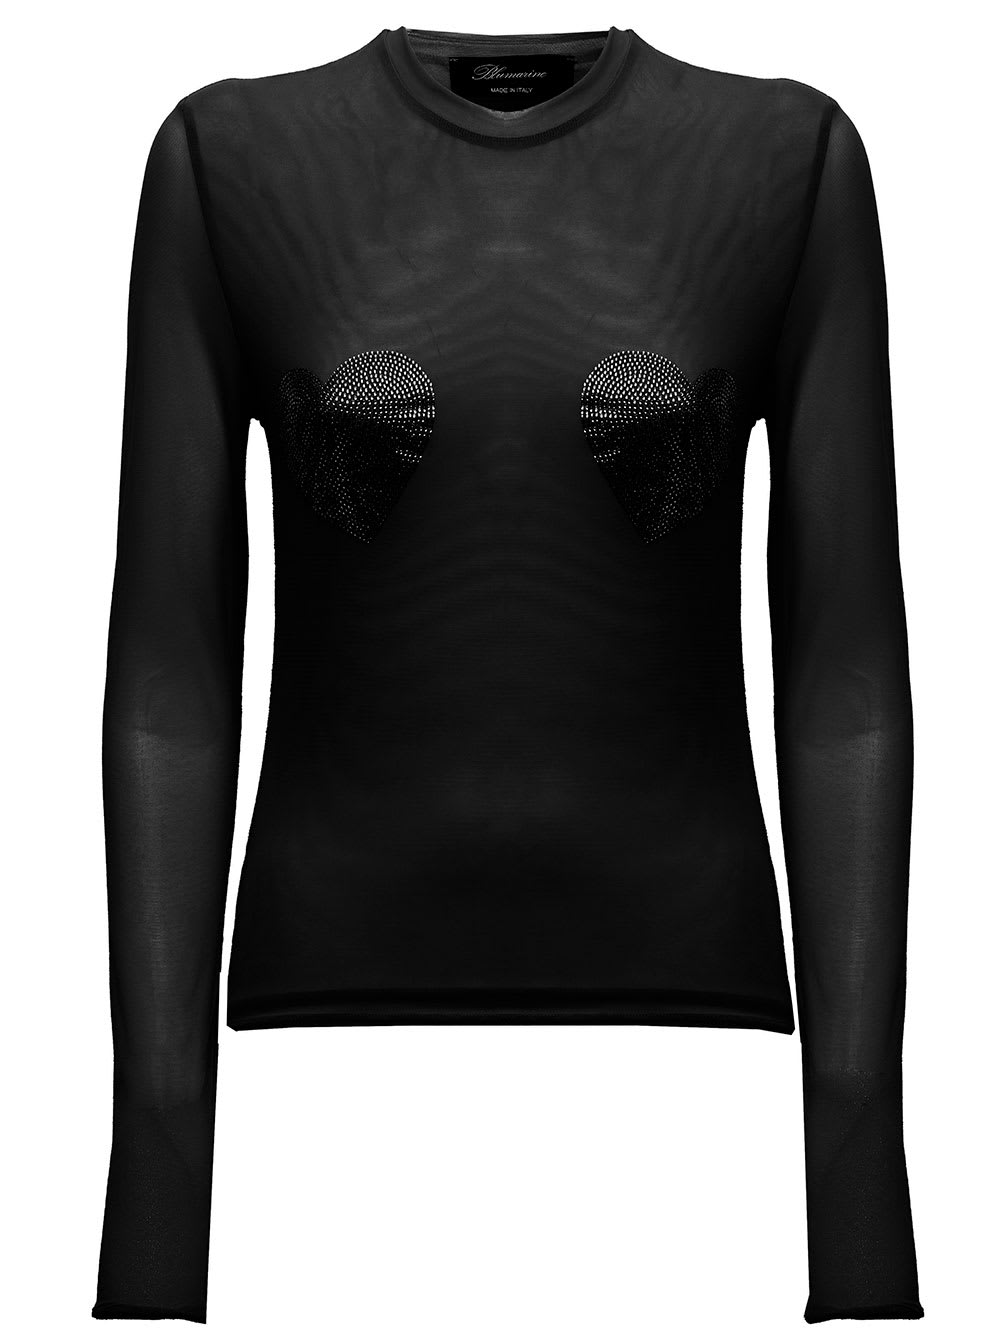 Black Sheer Tulle Long-sleeved Shirt With Hearts Detail Blumarine Woman